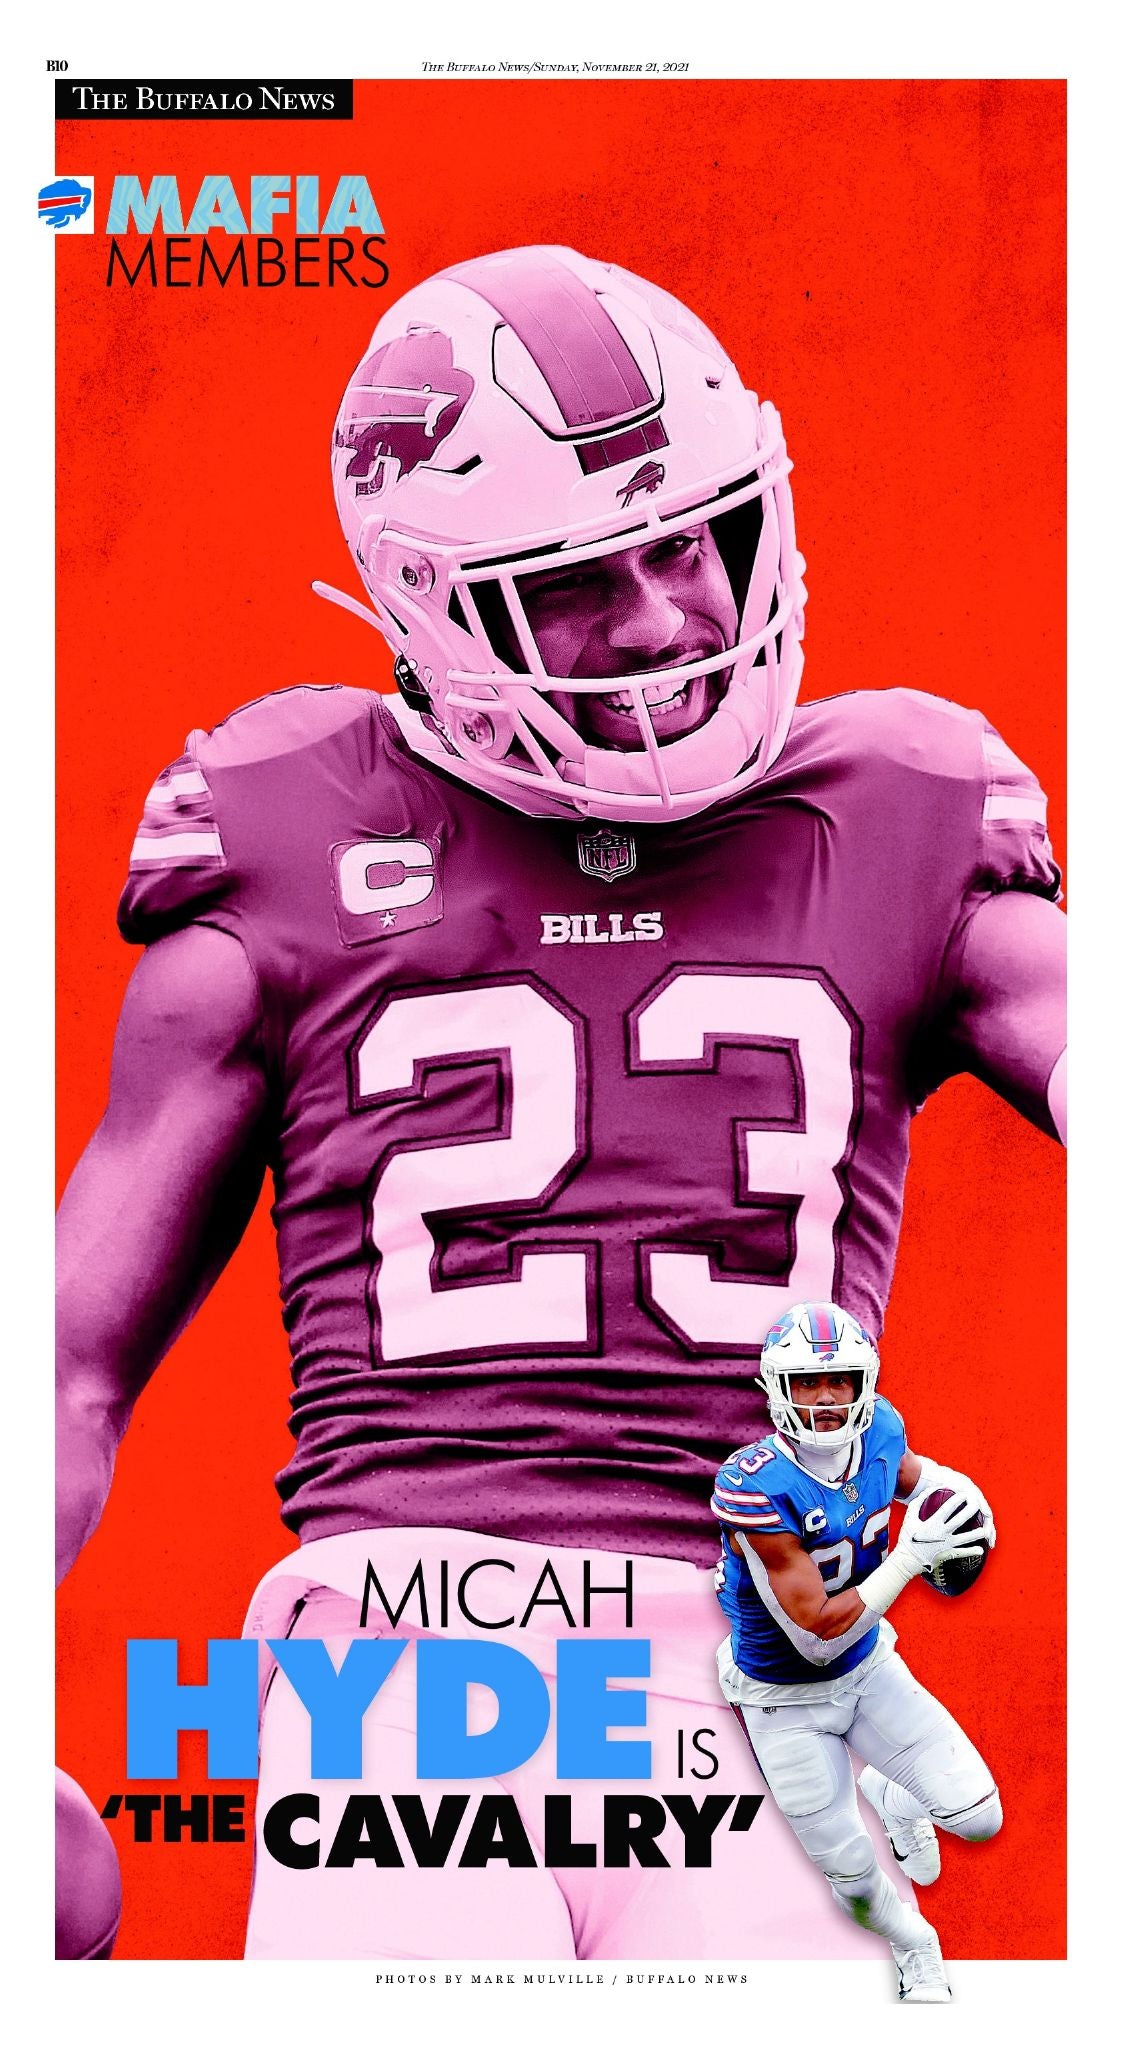 Micah Hyde "The Cavalry" - Mafia Members Poster Page